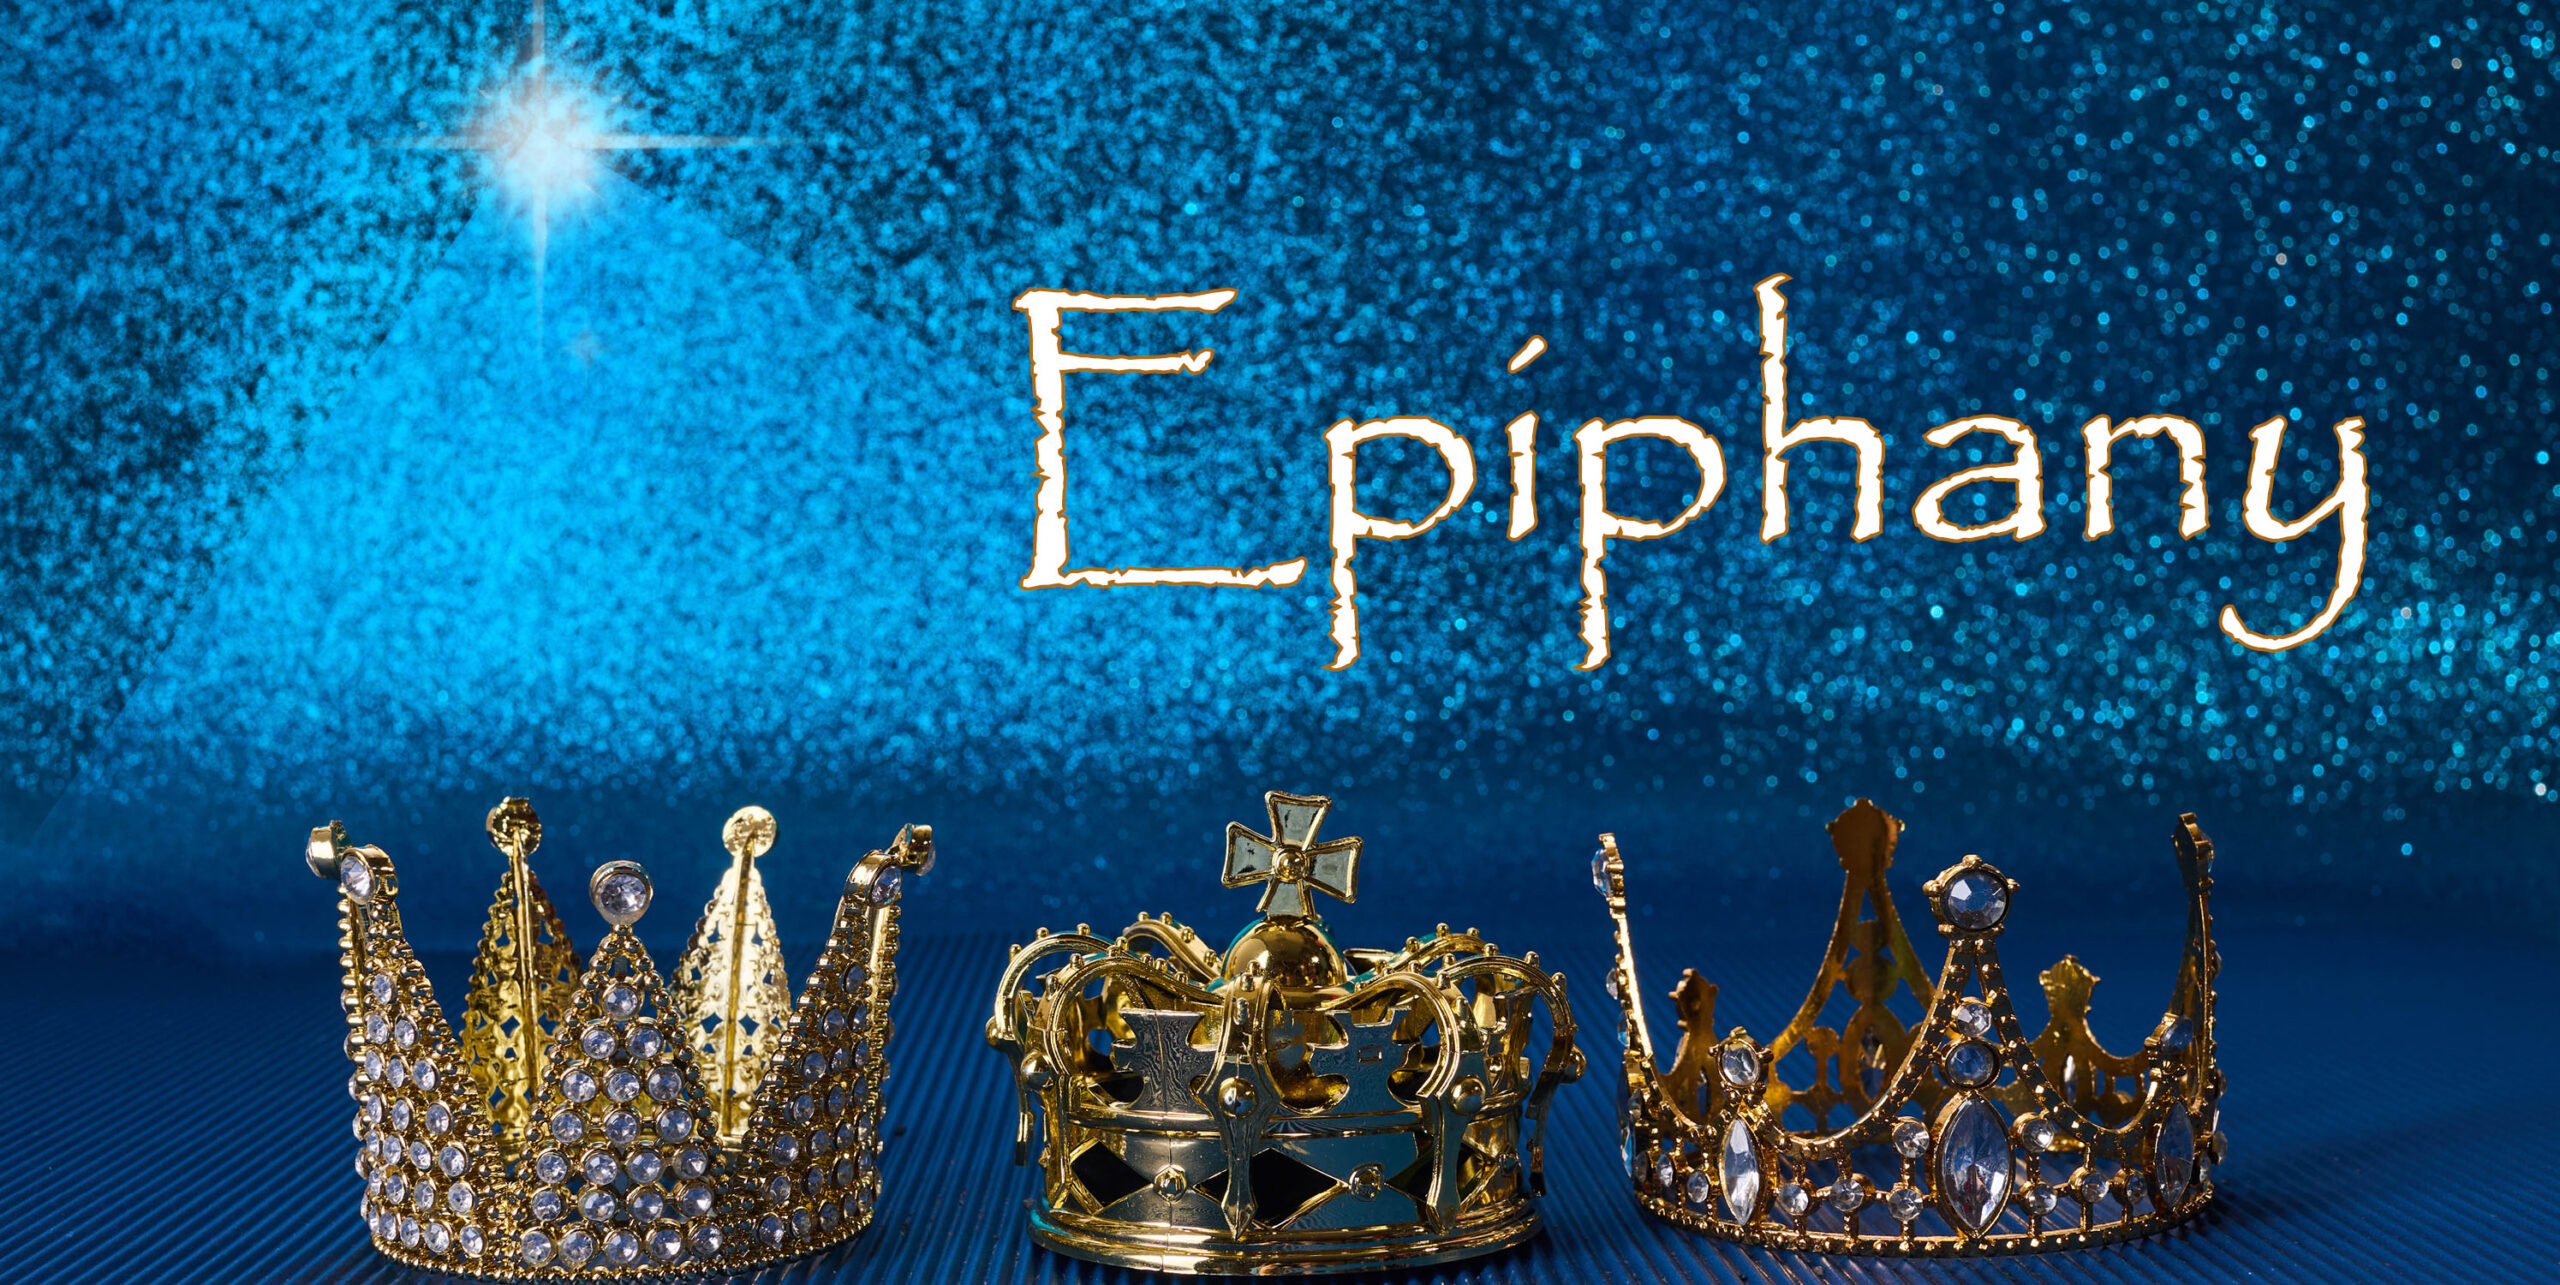 Picture of three crowns. Above them is an image of a star and the word "Epiphany."